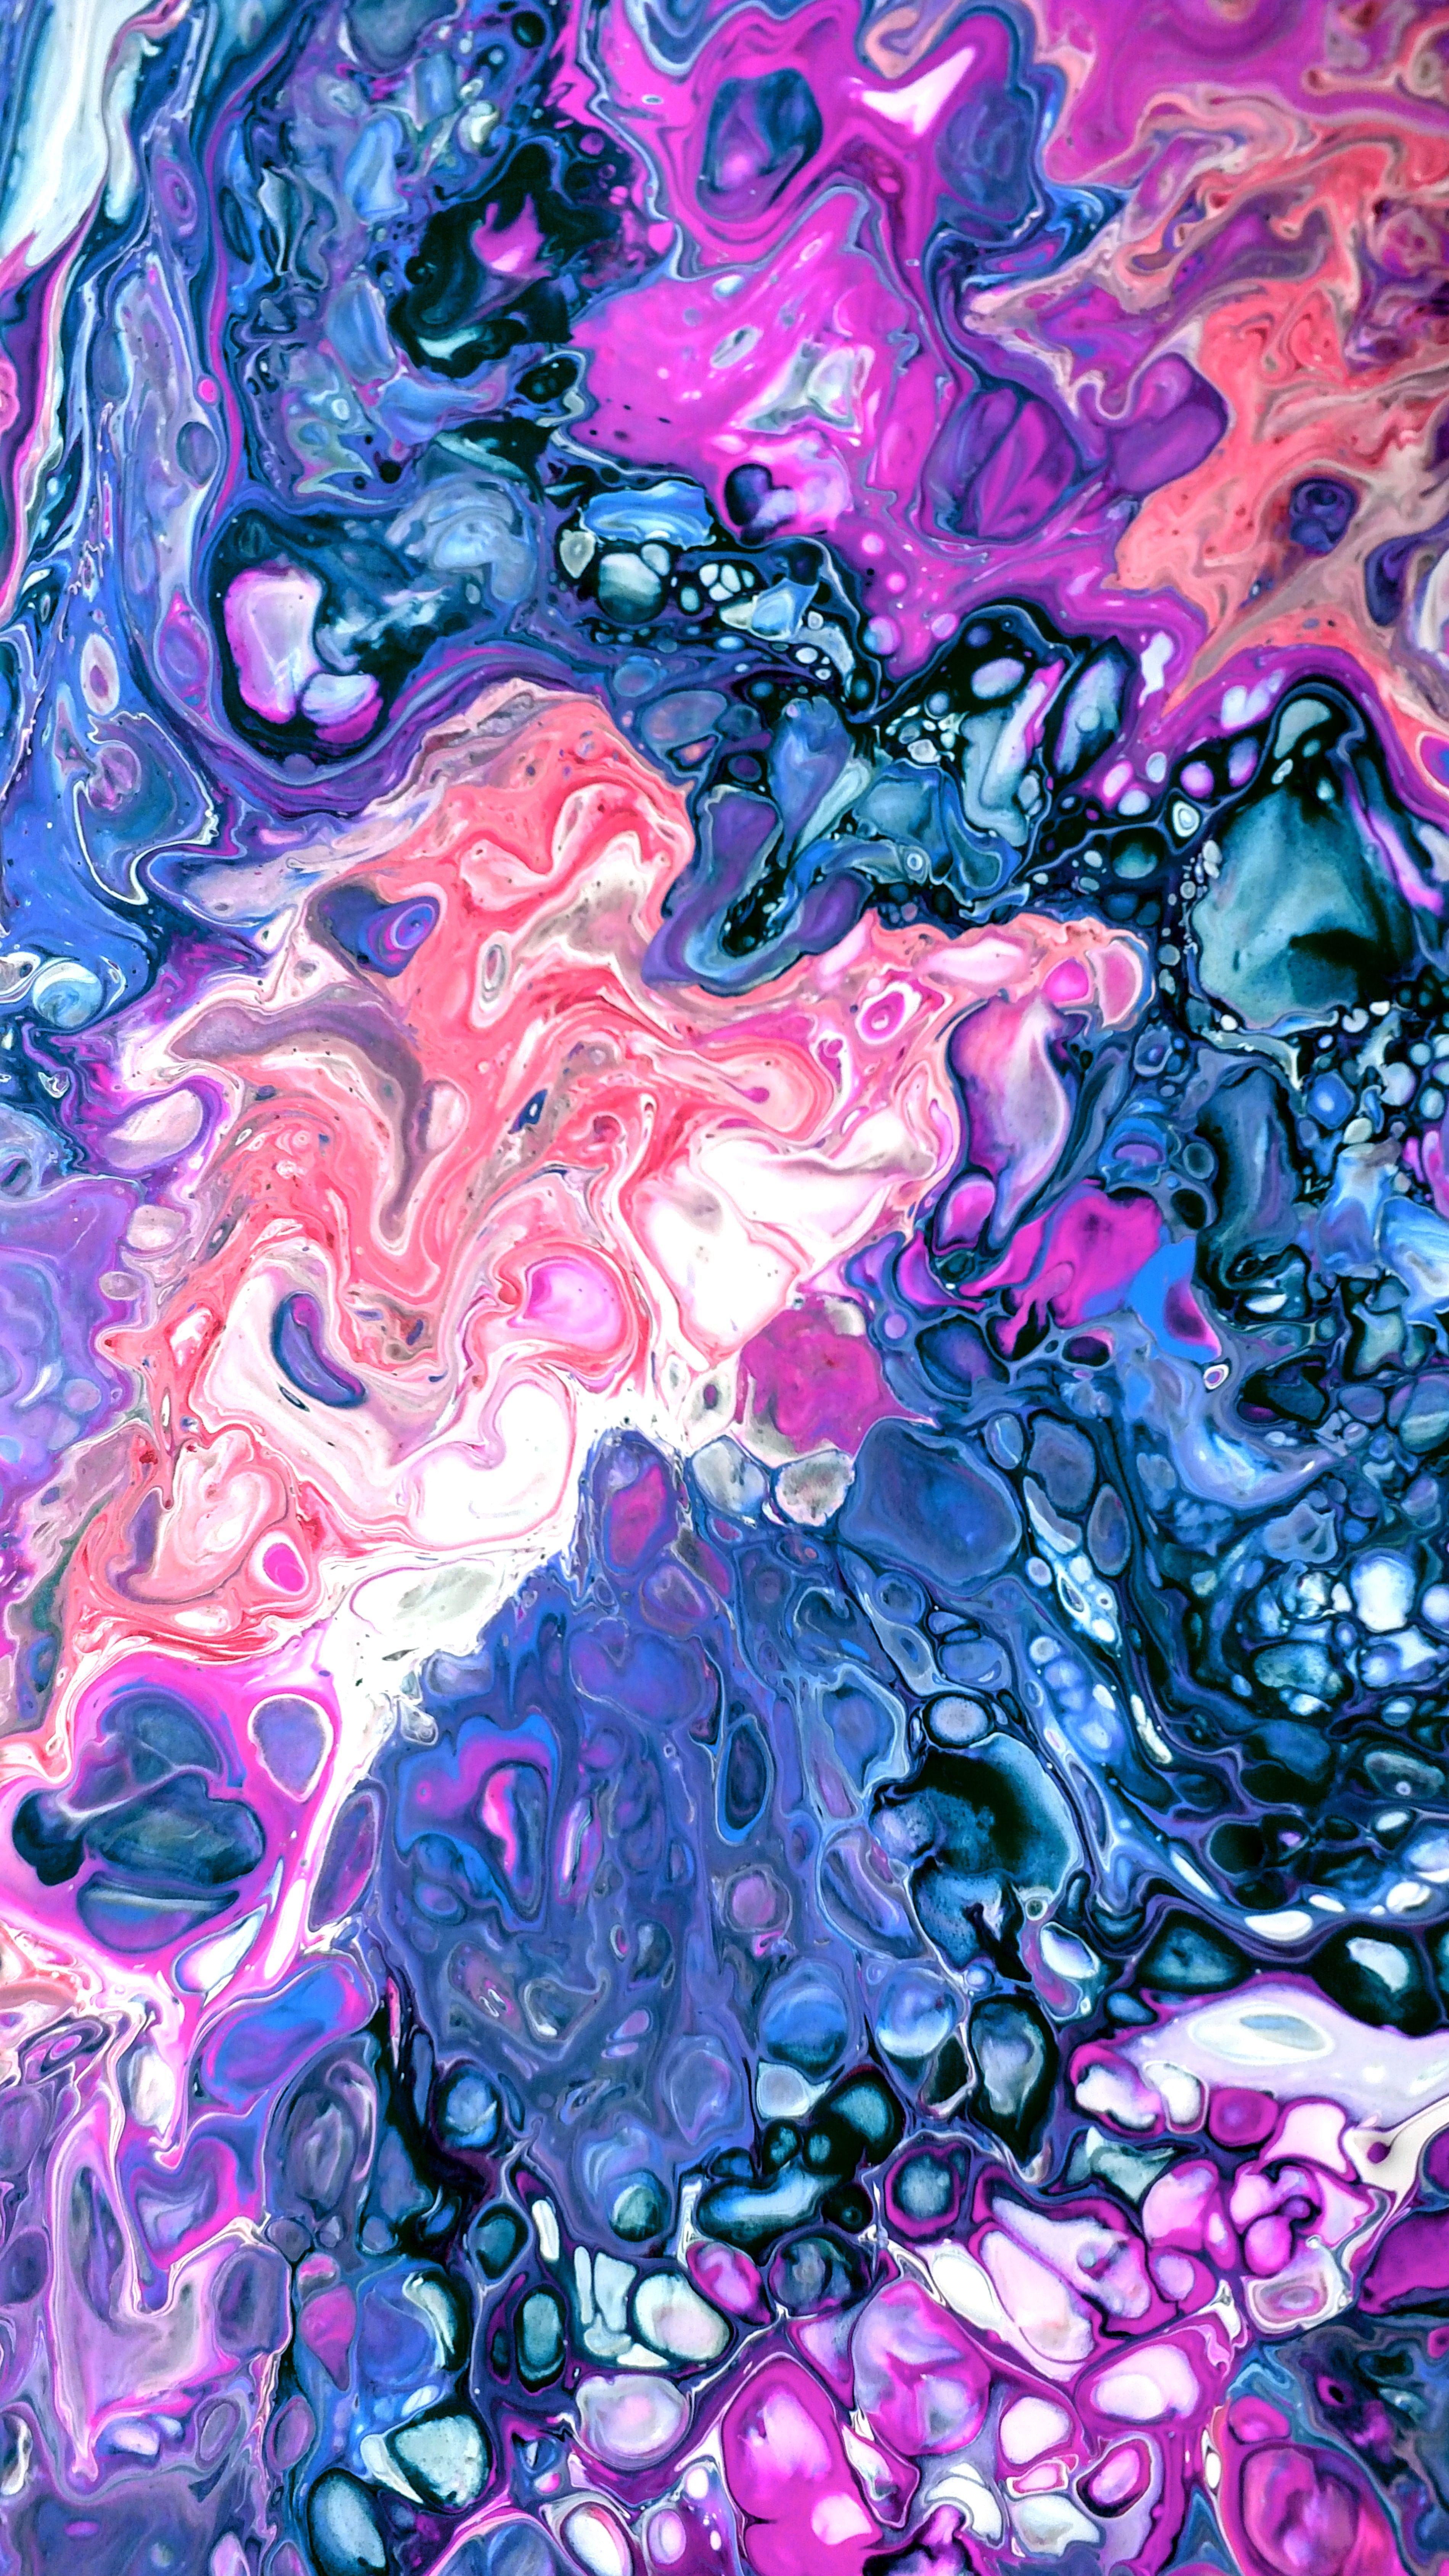 Fun colors in a fluid pour painting #originalart. Colorful paintings acrylic, Fluid painting, Pour painting